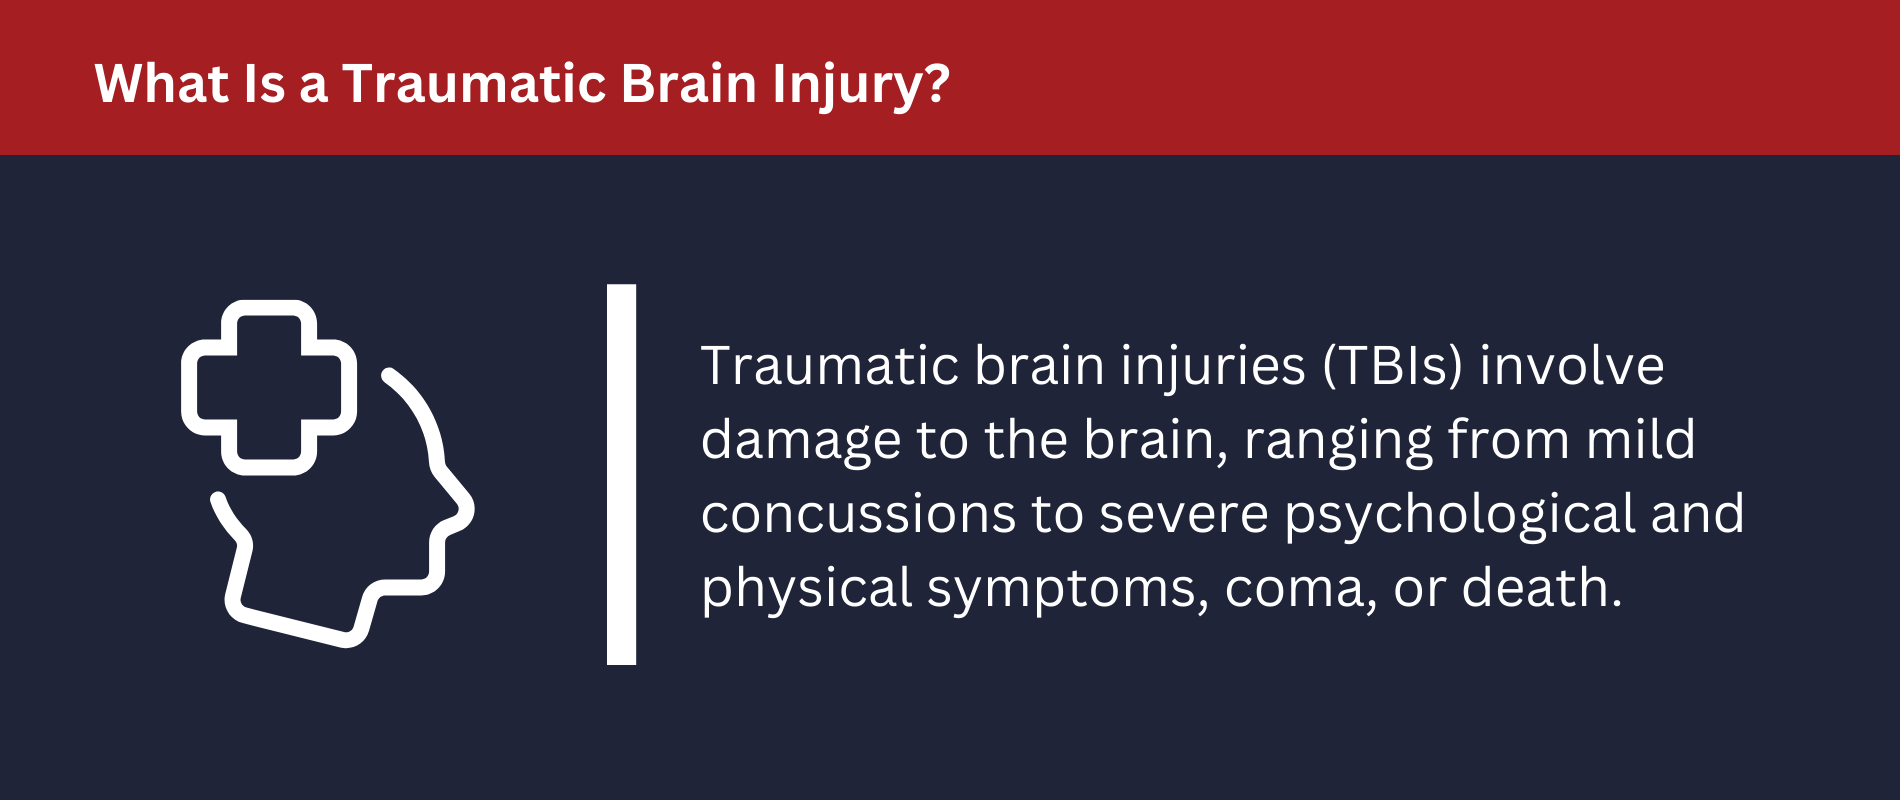 What Is a Traumatic Brain Injury